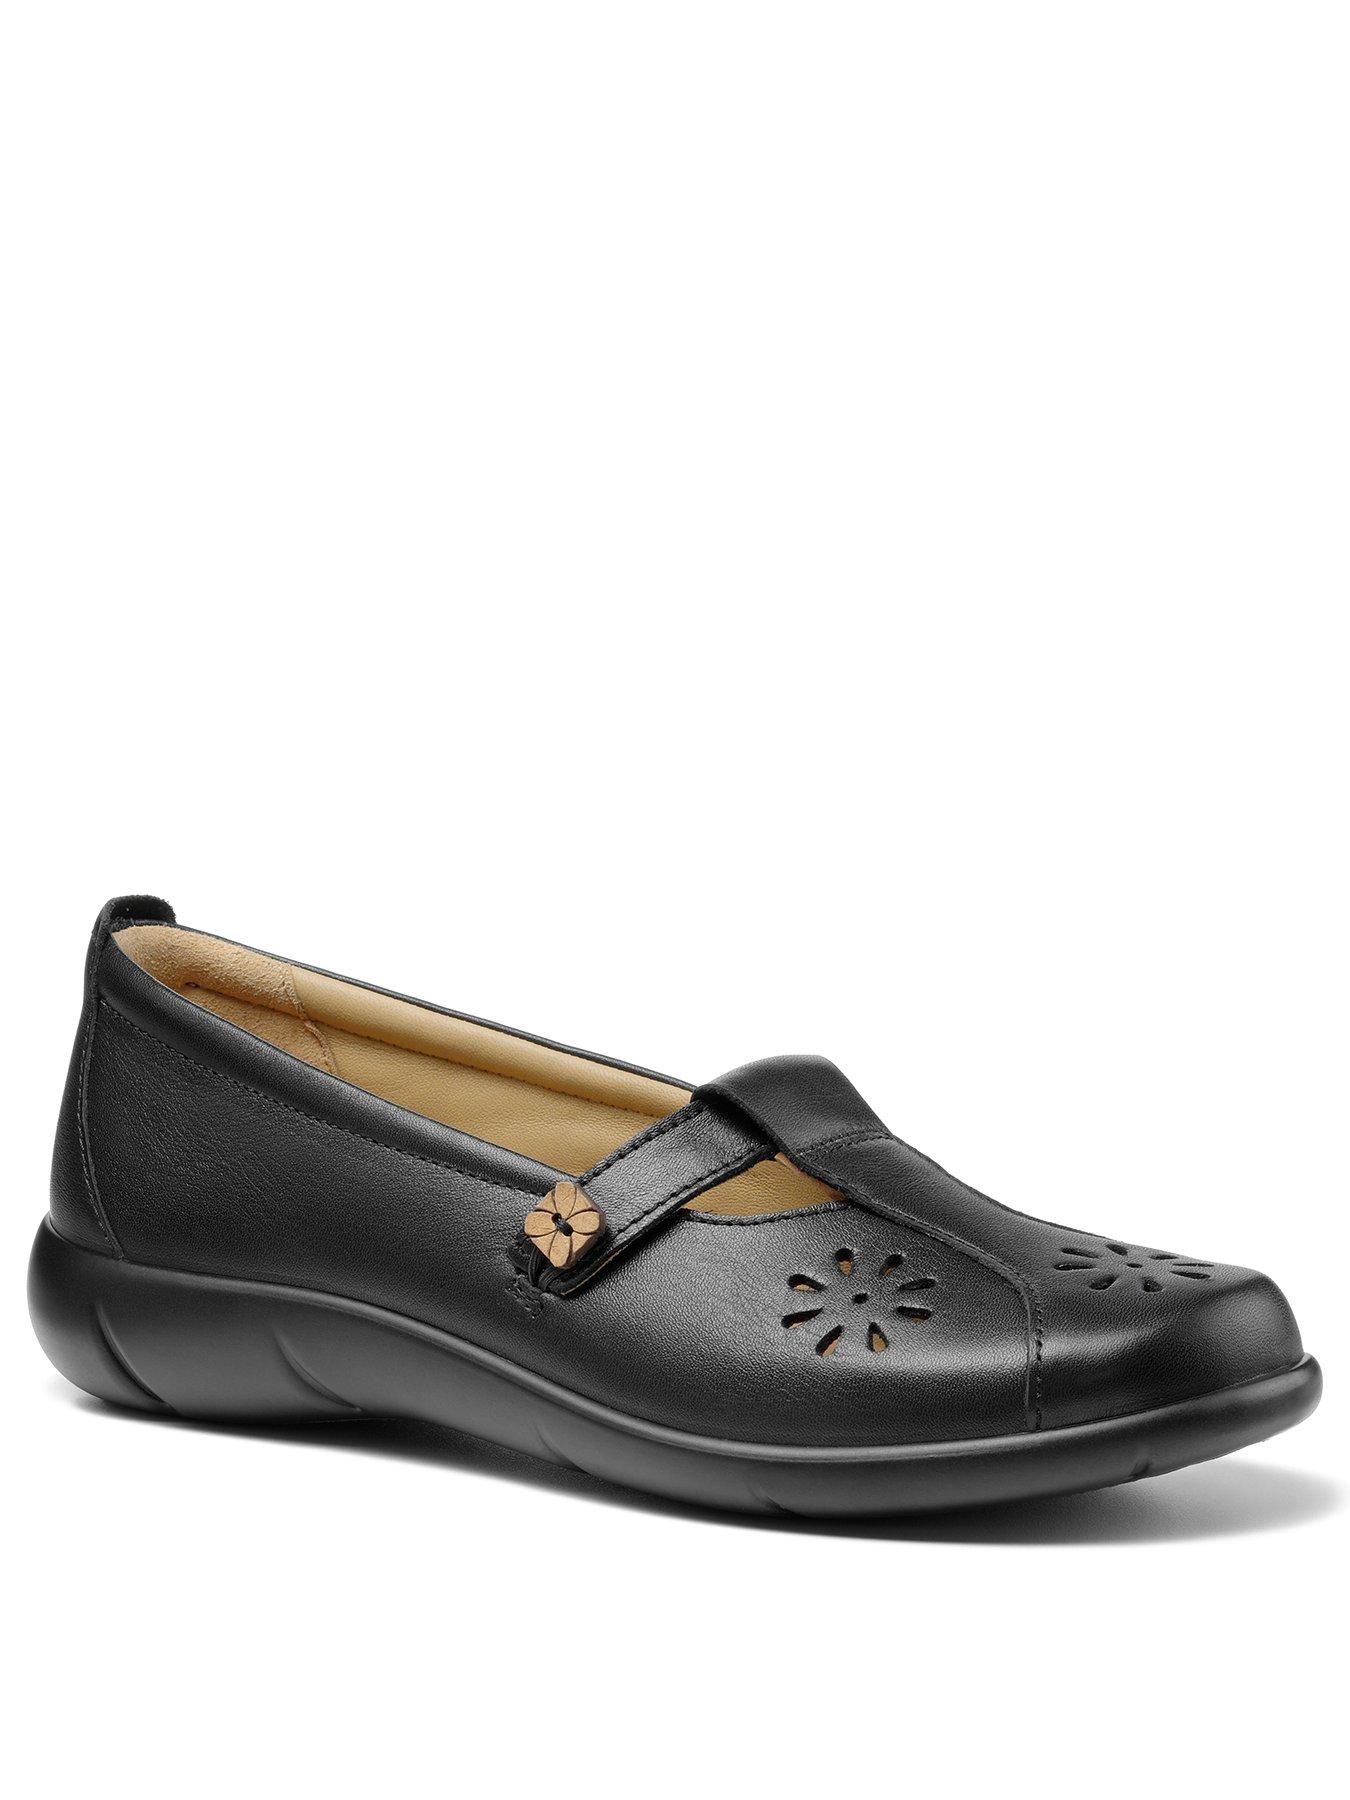 hotter loafers ladies